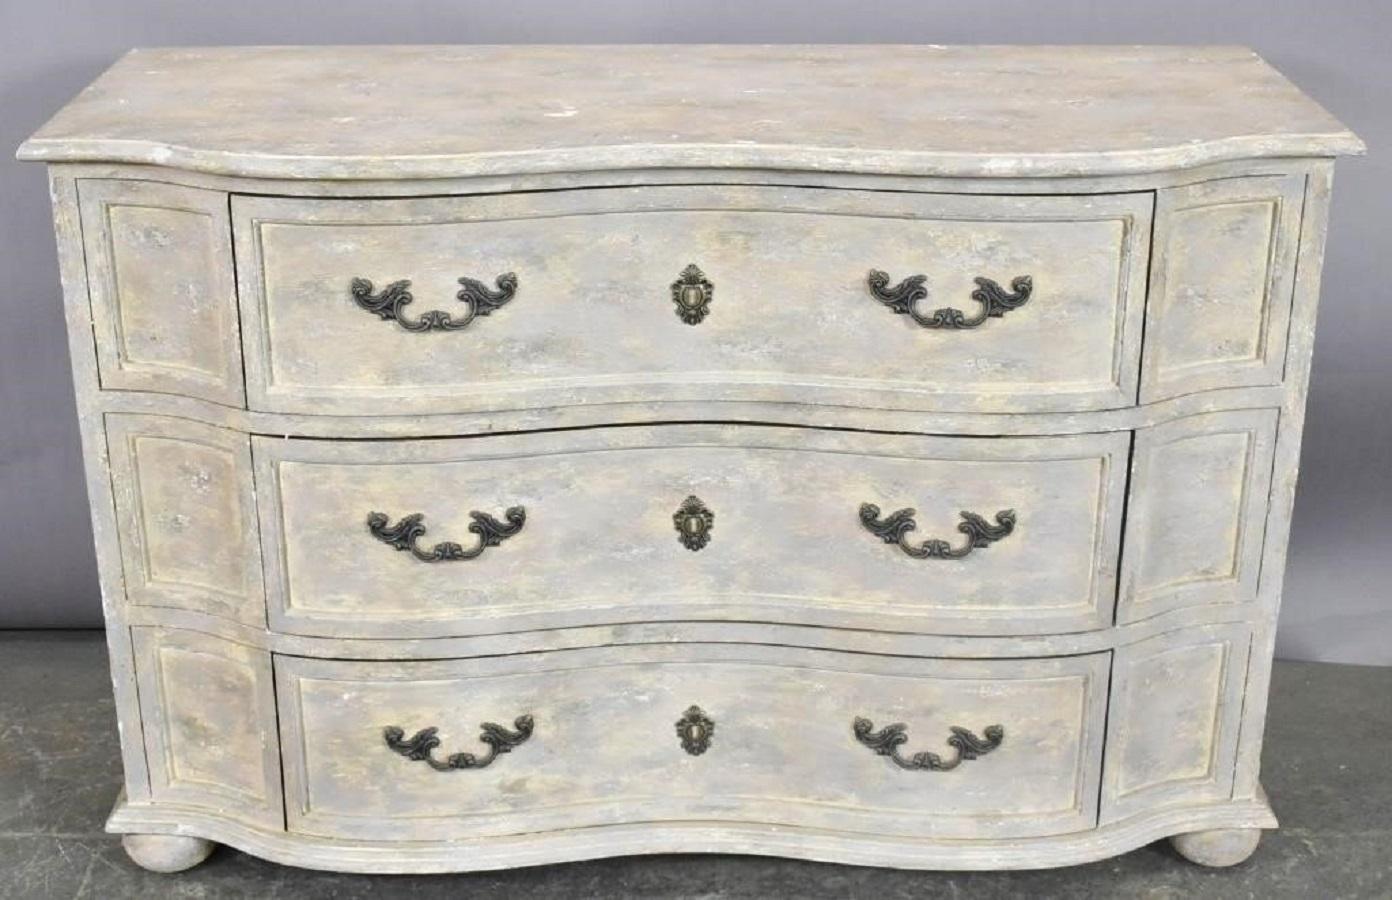 Gustavian style gray painted chest of drawers, early 20th century.